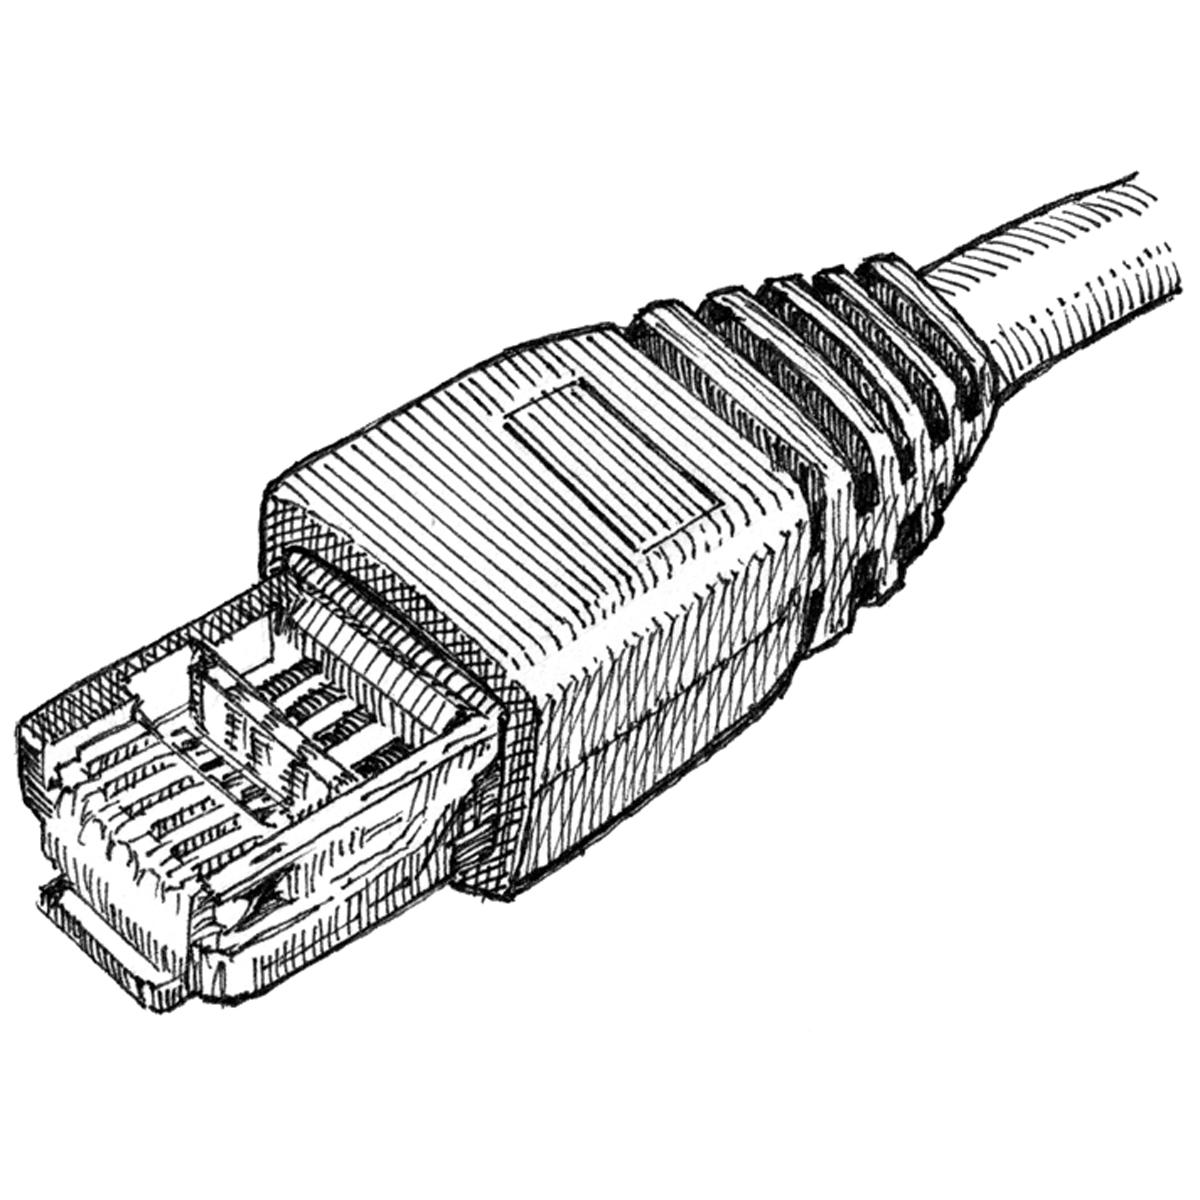 Limited edition print from pen and ink drawing of an ethernet connector